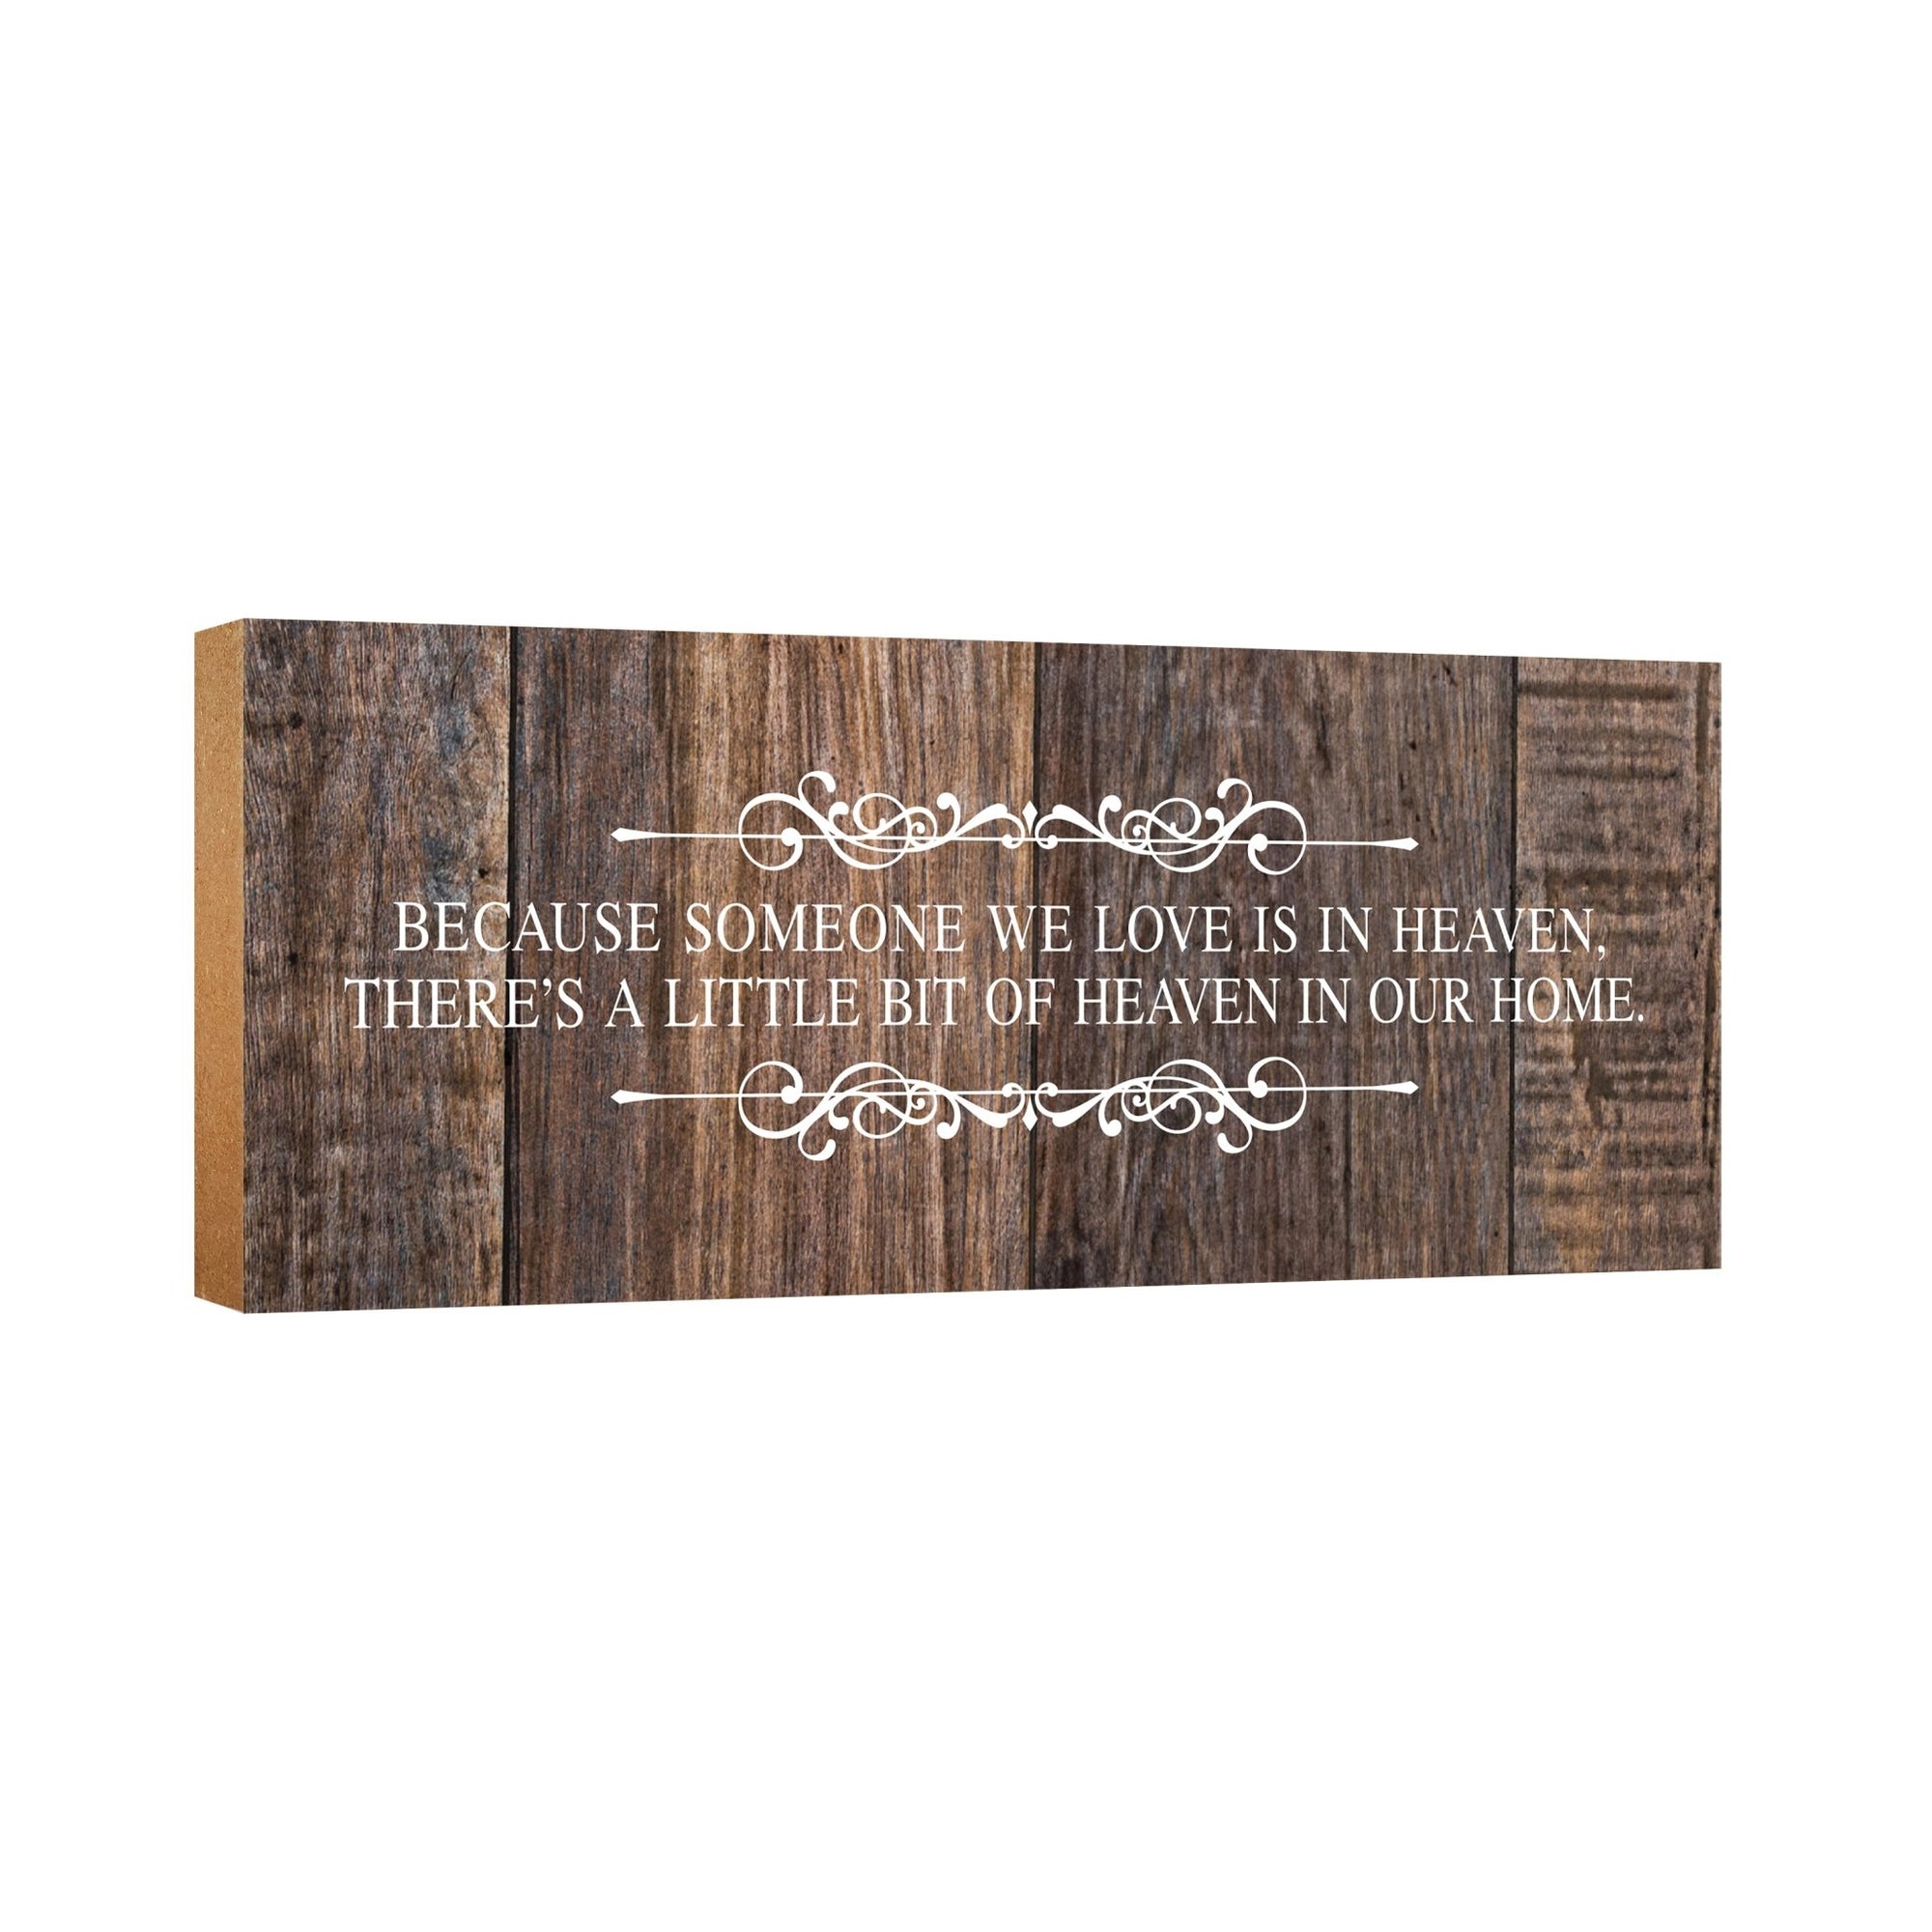 Modern Inspirational Pet Memorial 4x10 inches Wooden Sign (Because Someone We Love) Tabletop Plaque Home Decoration Loss of Pet Bereavement Sympathy Keepsake - LifeSong Milestones